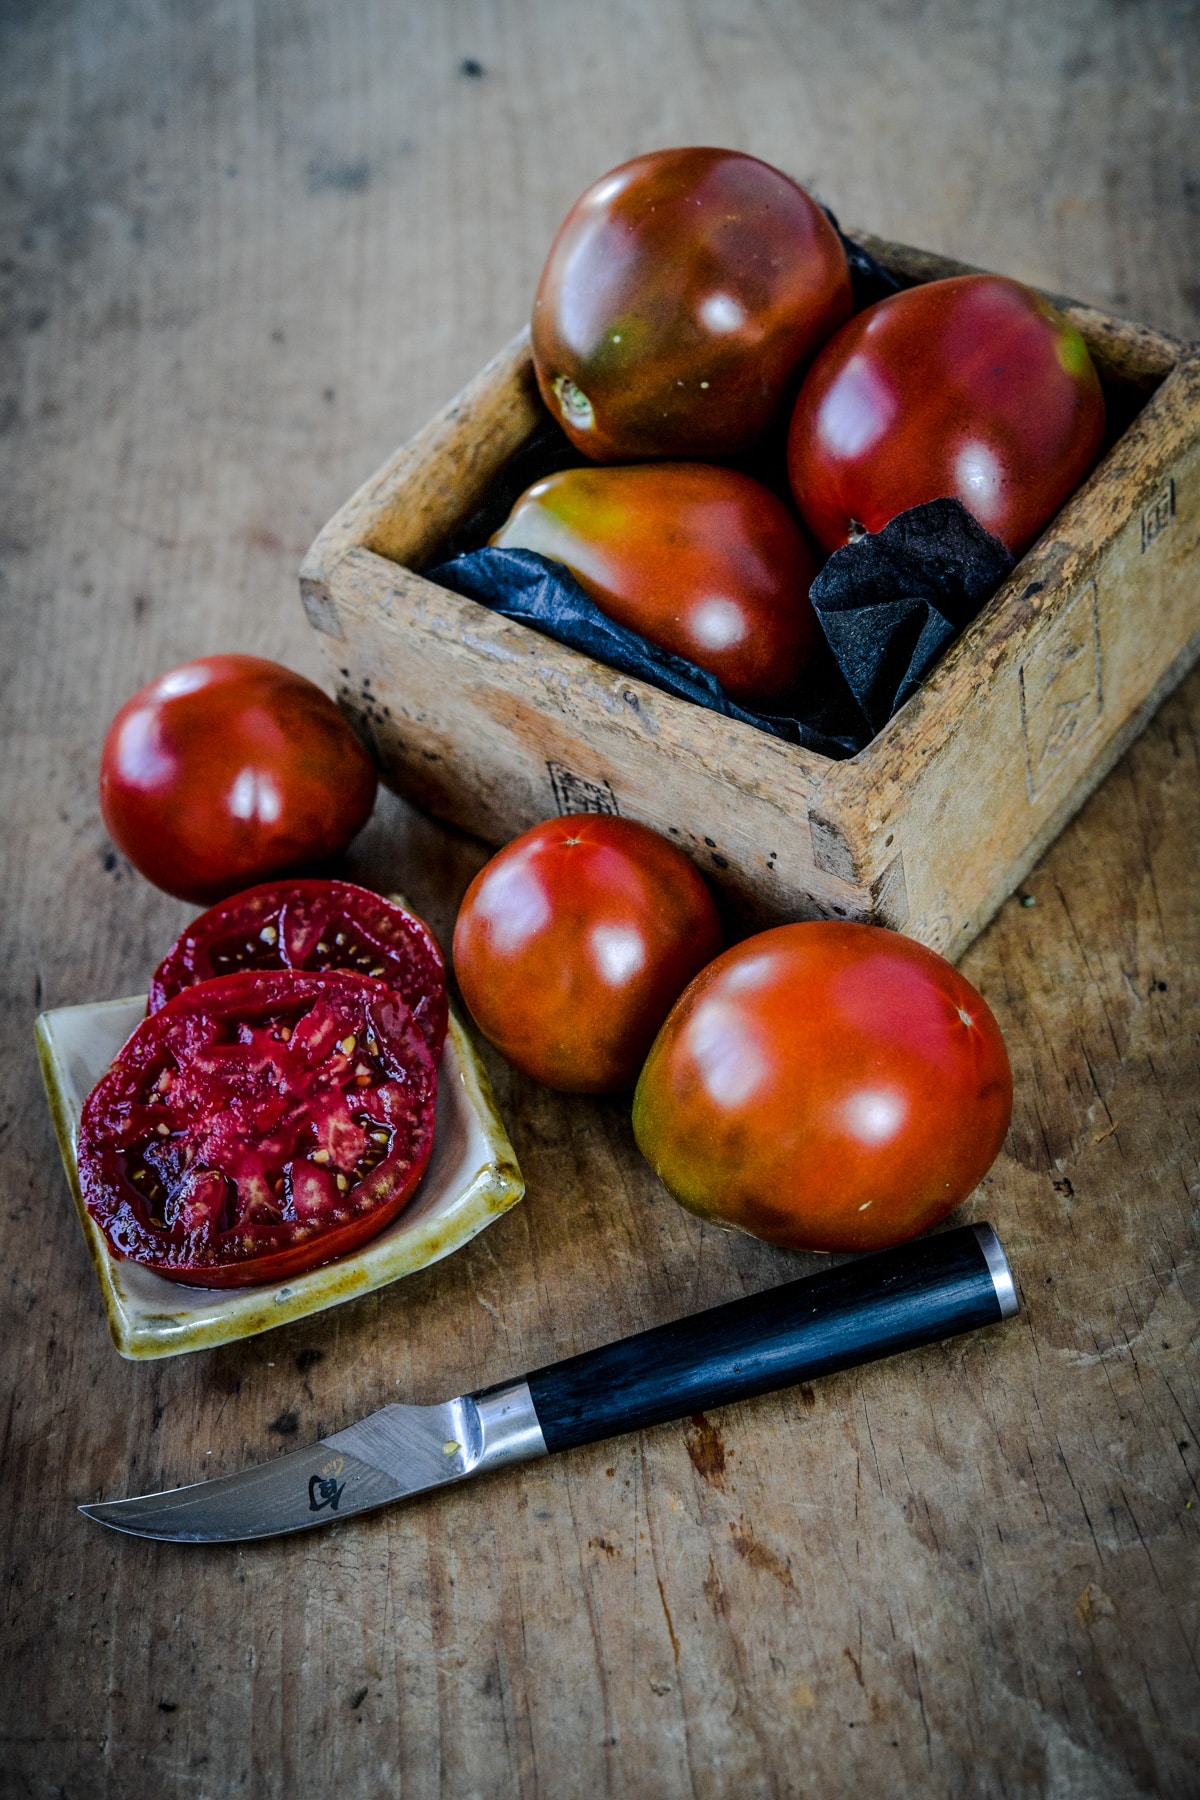 Black tomatoes in a wooden box with a few on the table. One is cut into slices in showing the inside flesh and seeds.